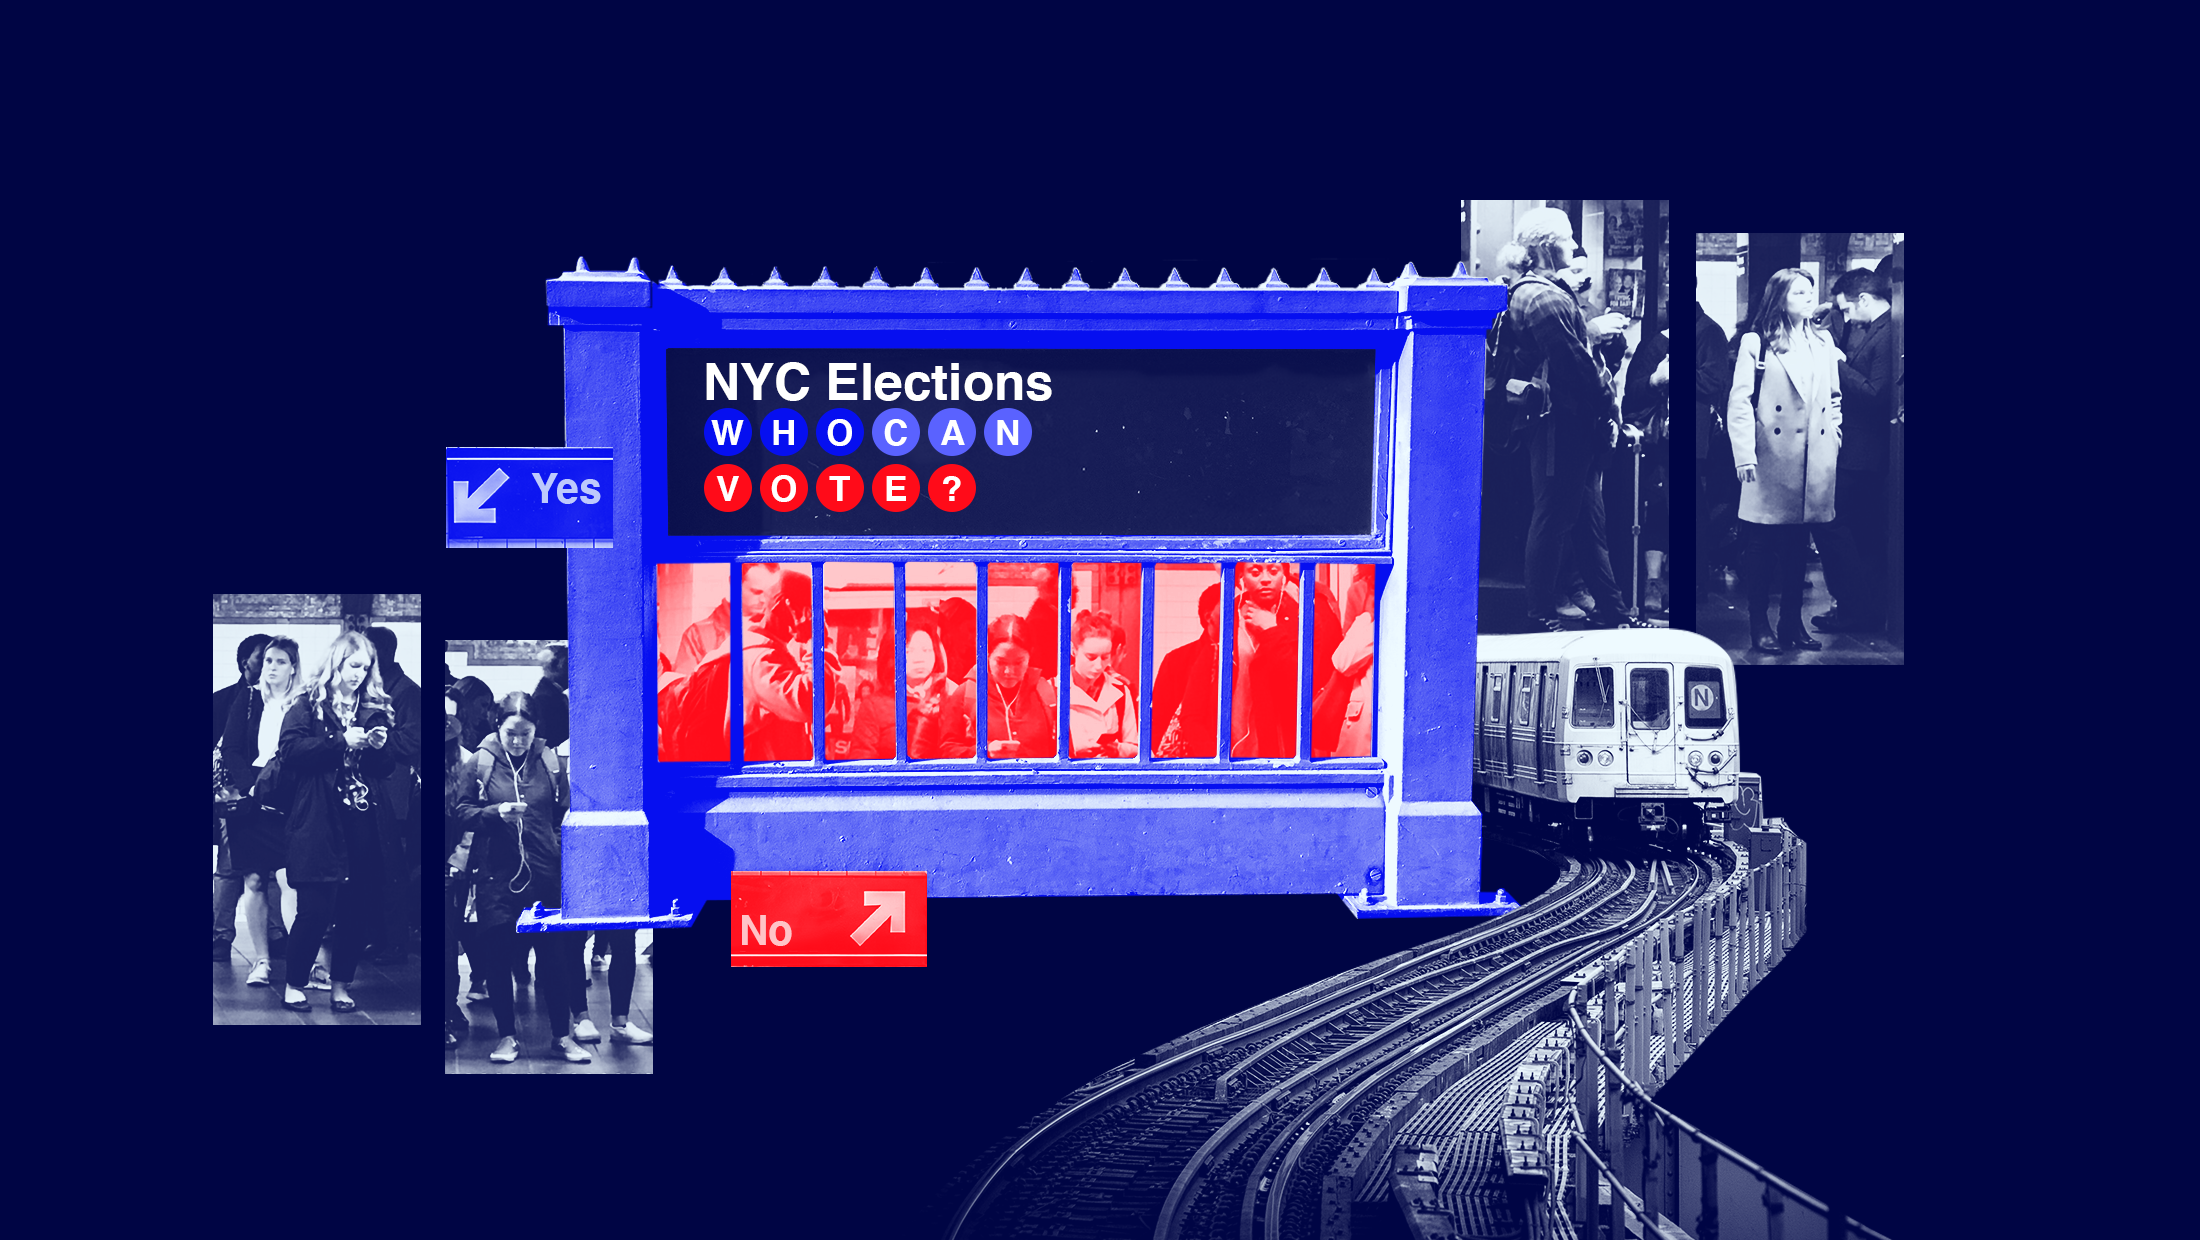 A busy NYC subway station with a sign that reads "NYC ELECTIONS WHO CAN VOTE" and two other small signs featuring up and down arrows that say "YES" and "NO"